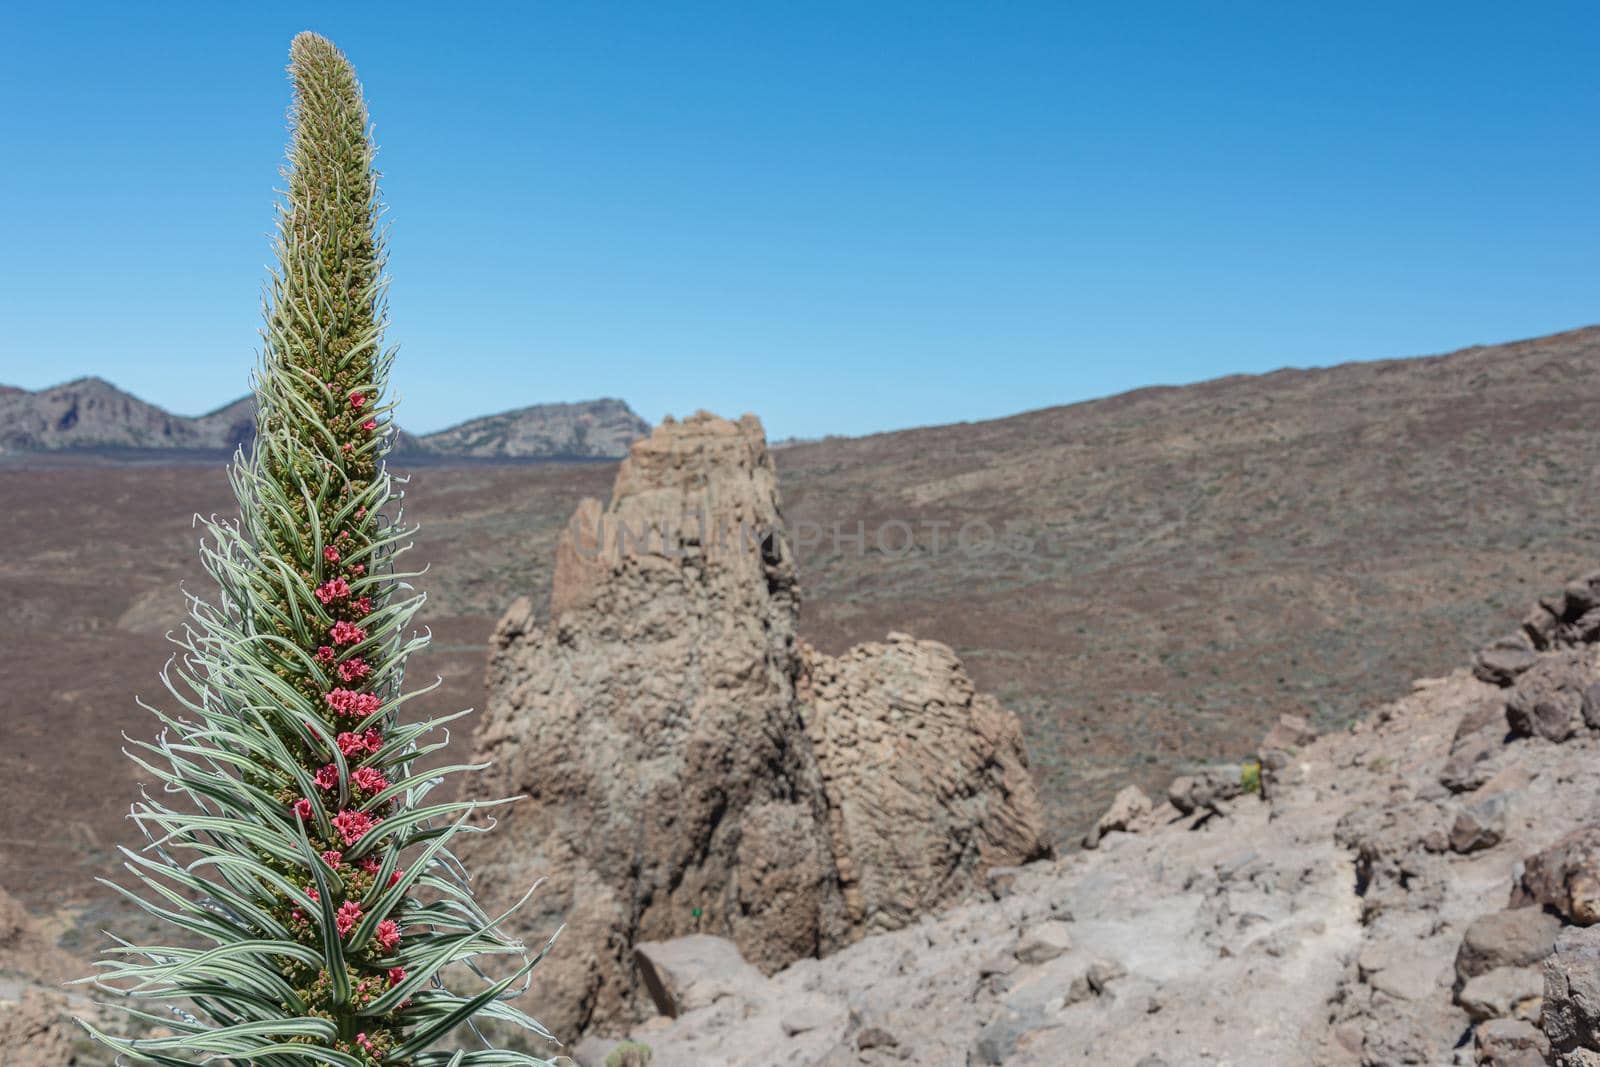 Bruise Of Wildpeeta. An exotic plant in the foothills of the Teide volcano. Blurry background, close-up by Grommik